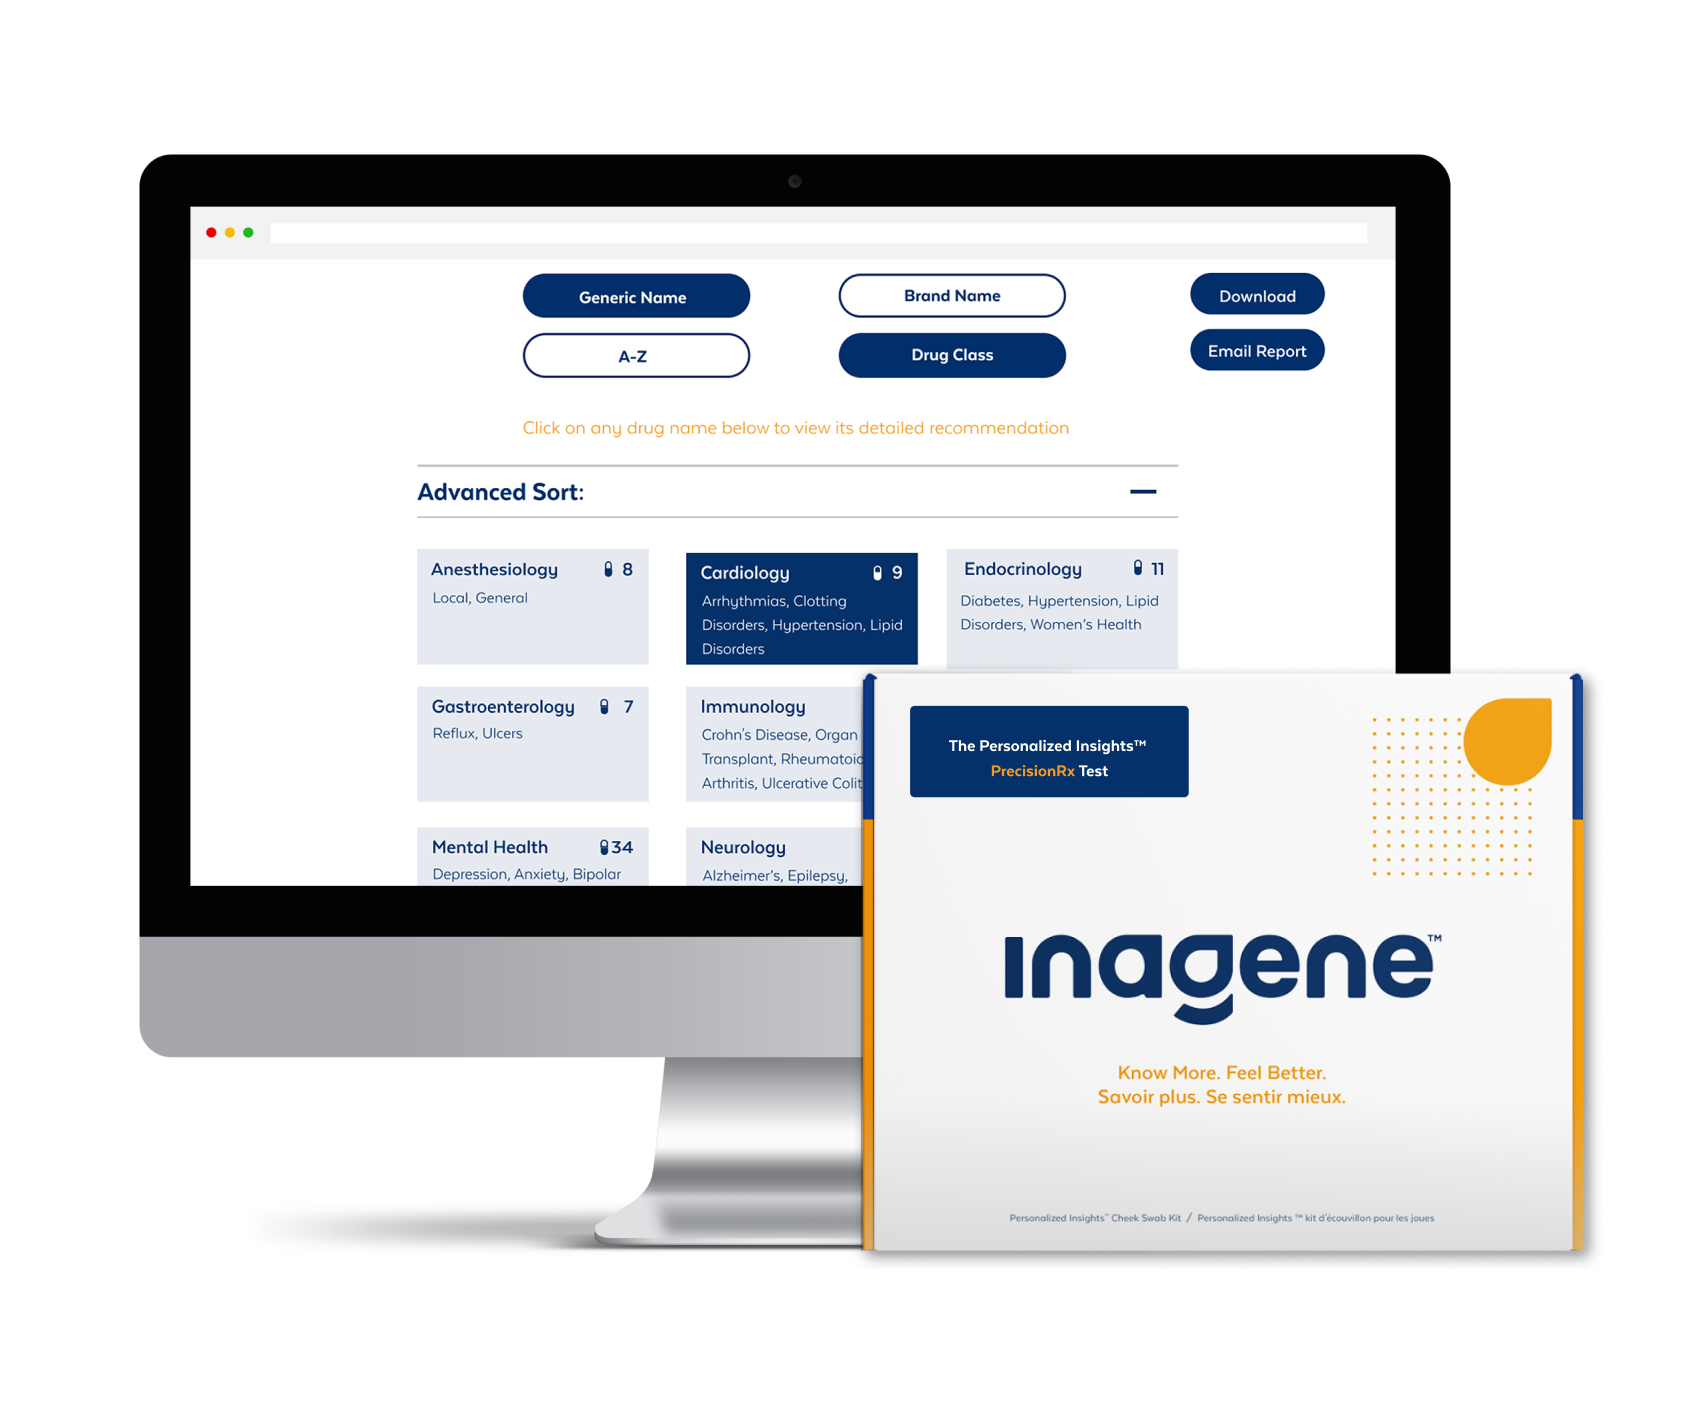 Inagene launches NEW Personalized Insights™ PrecisionRx: the “other test” that can help protect your health